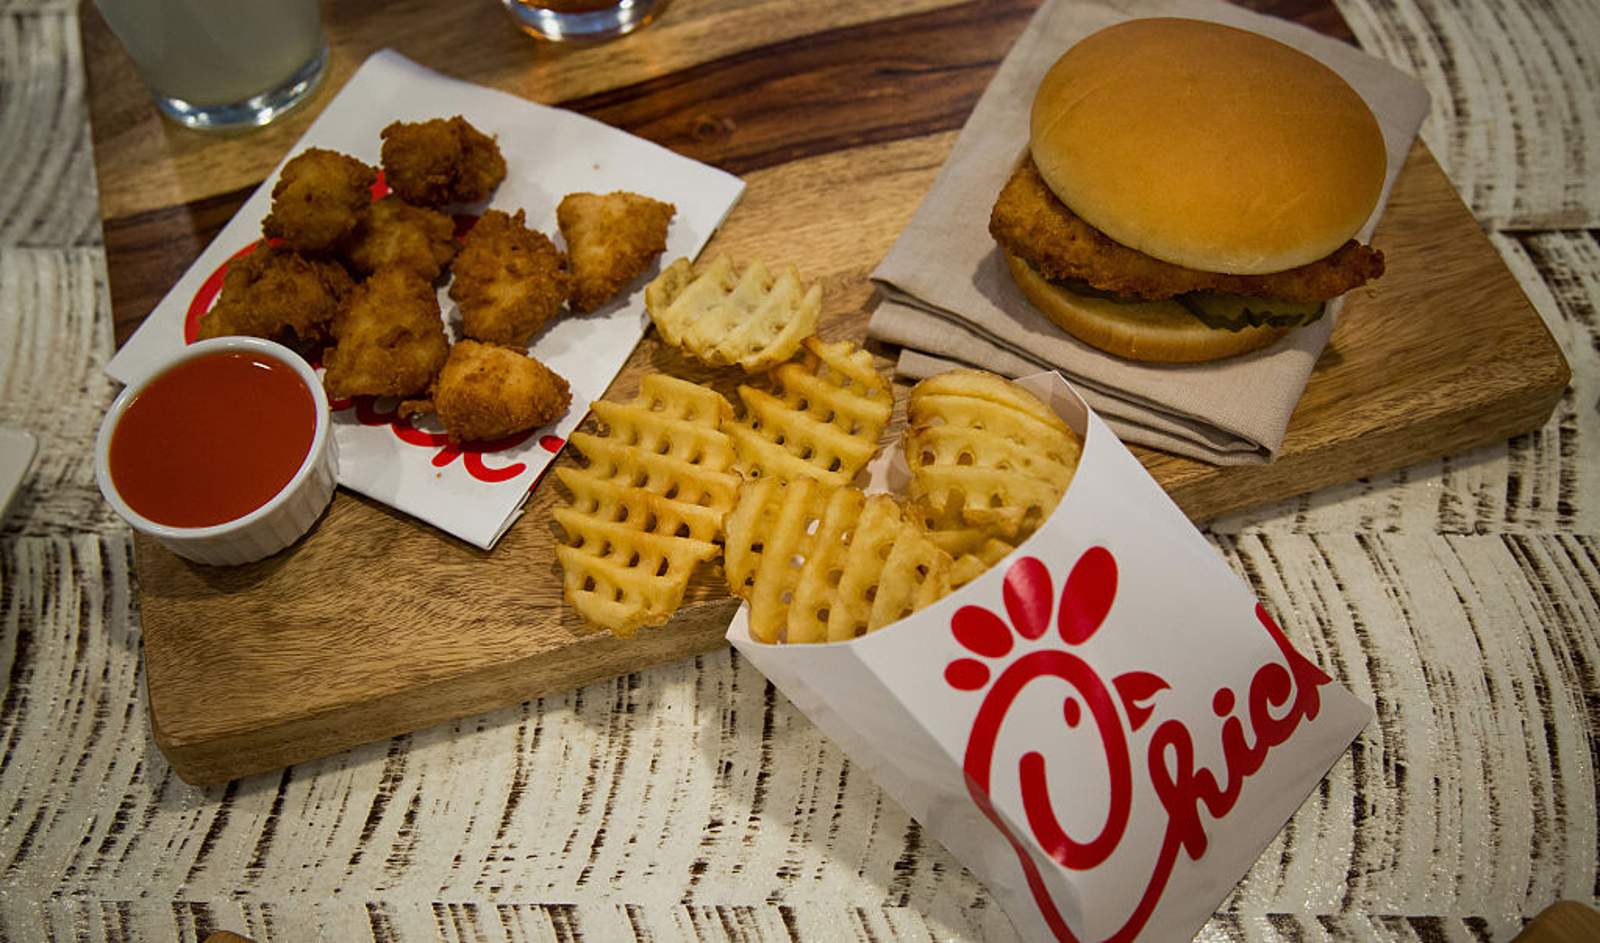 "Jewel of Southern Fast Food" Comes To Las Vegas